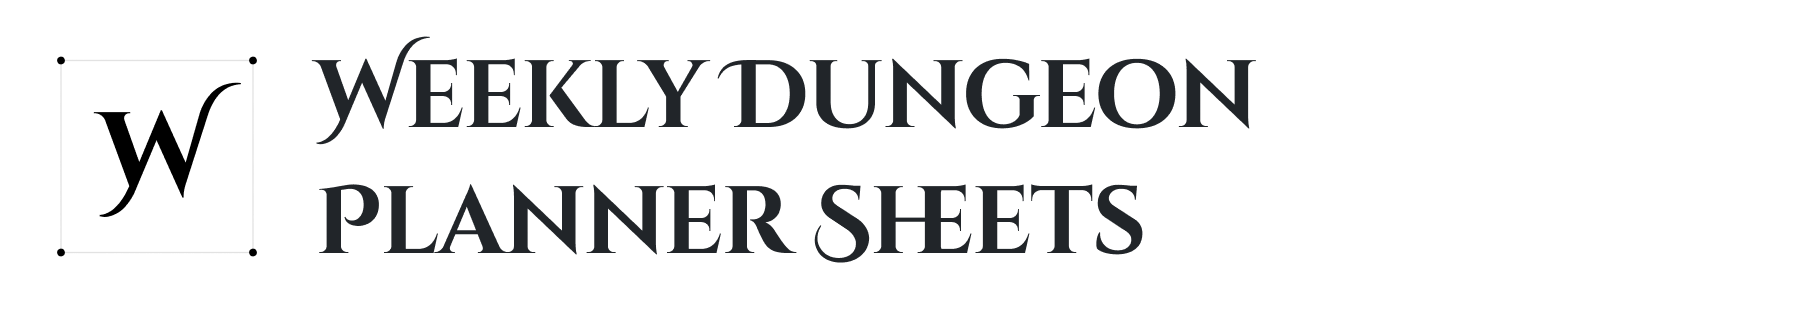 weekly-dungeon-planner-sheets-by-lazarus